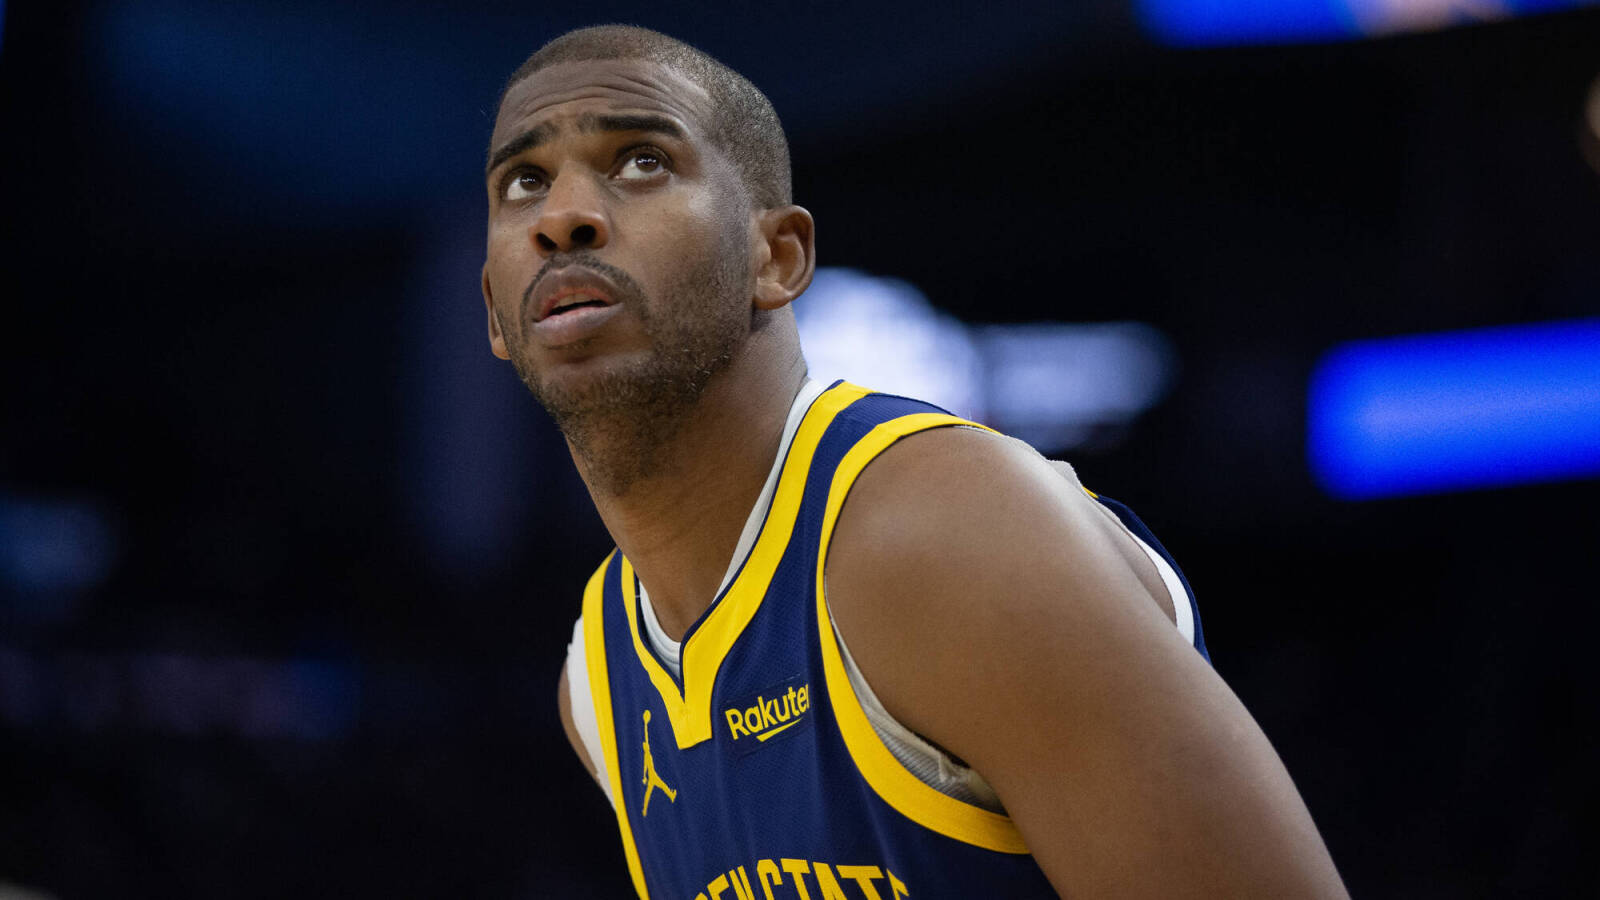 Chris Paul becomes latest player to accuse Daryl Morey of not keeping his word